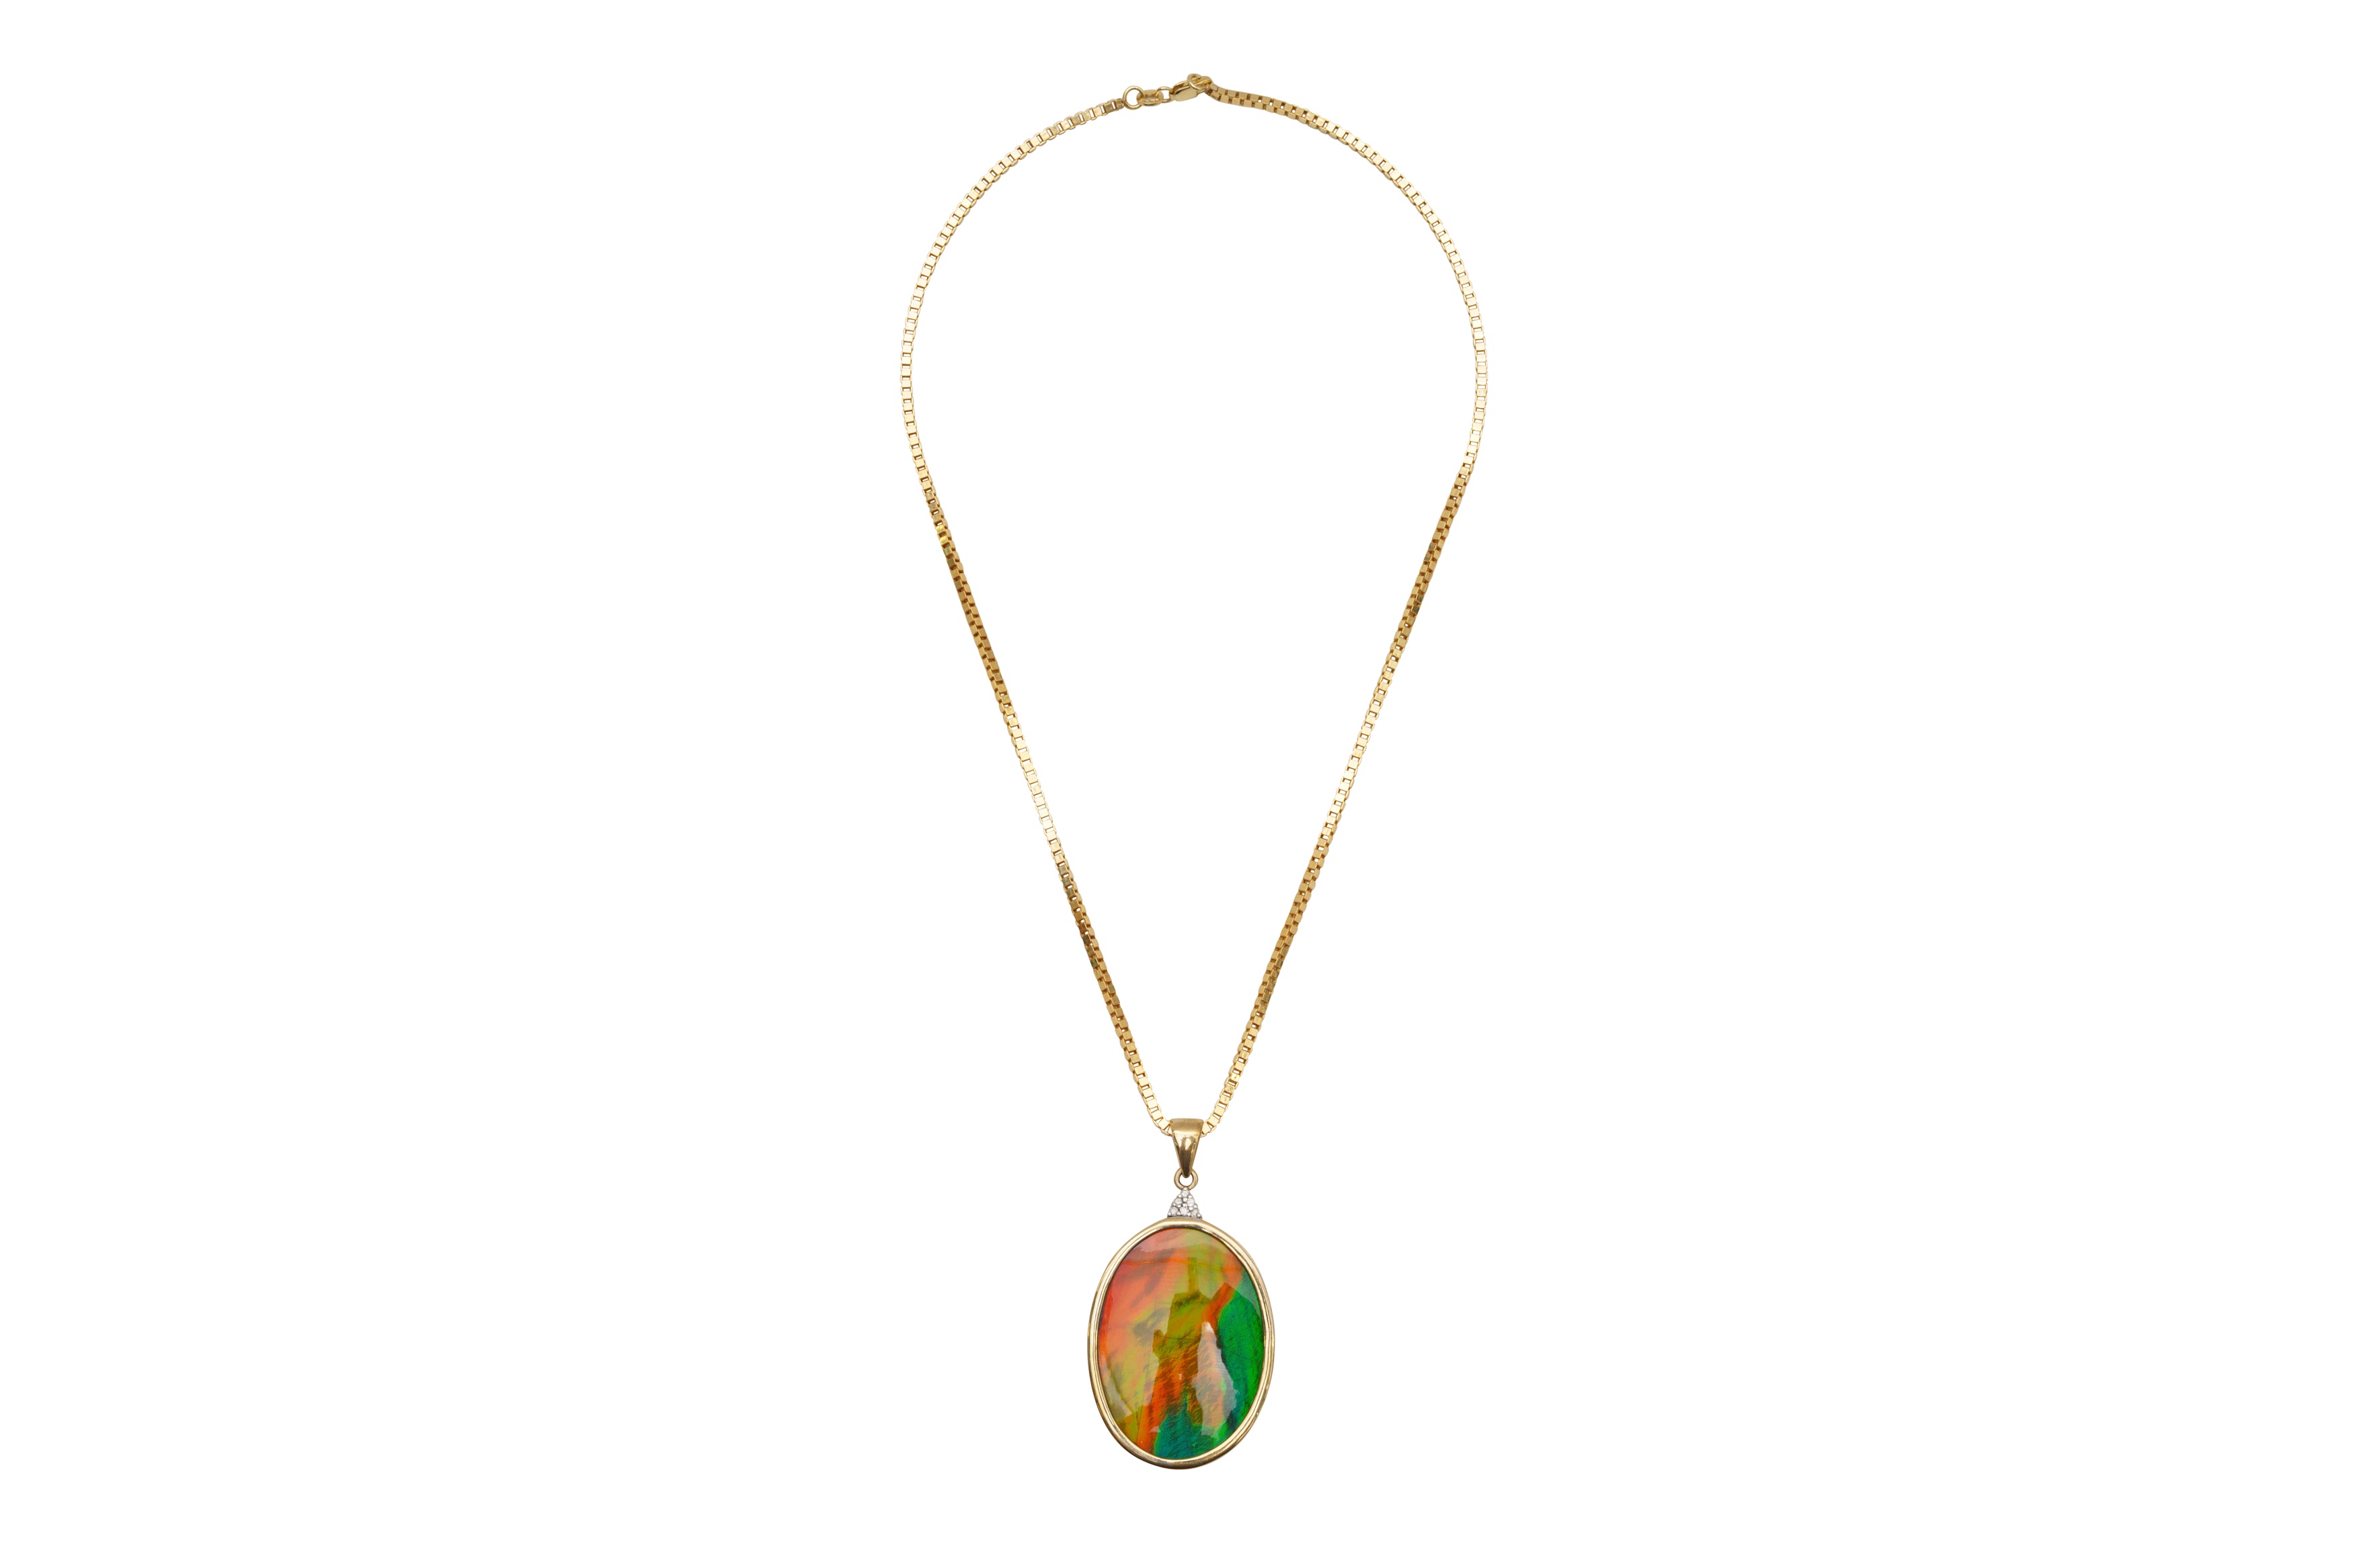 A 9CT GOLD AMMOLITE-TRIPLET PENDANT NECKLACE - Image 2 of 3